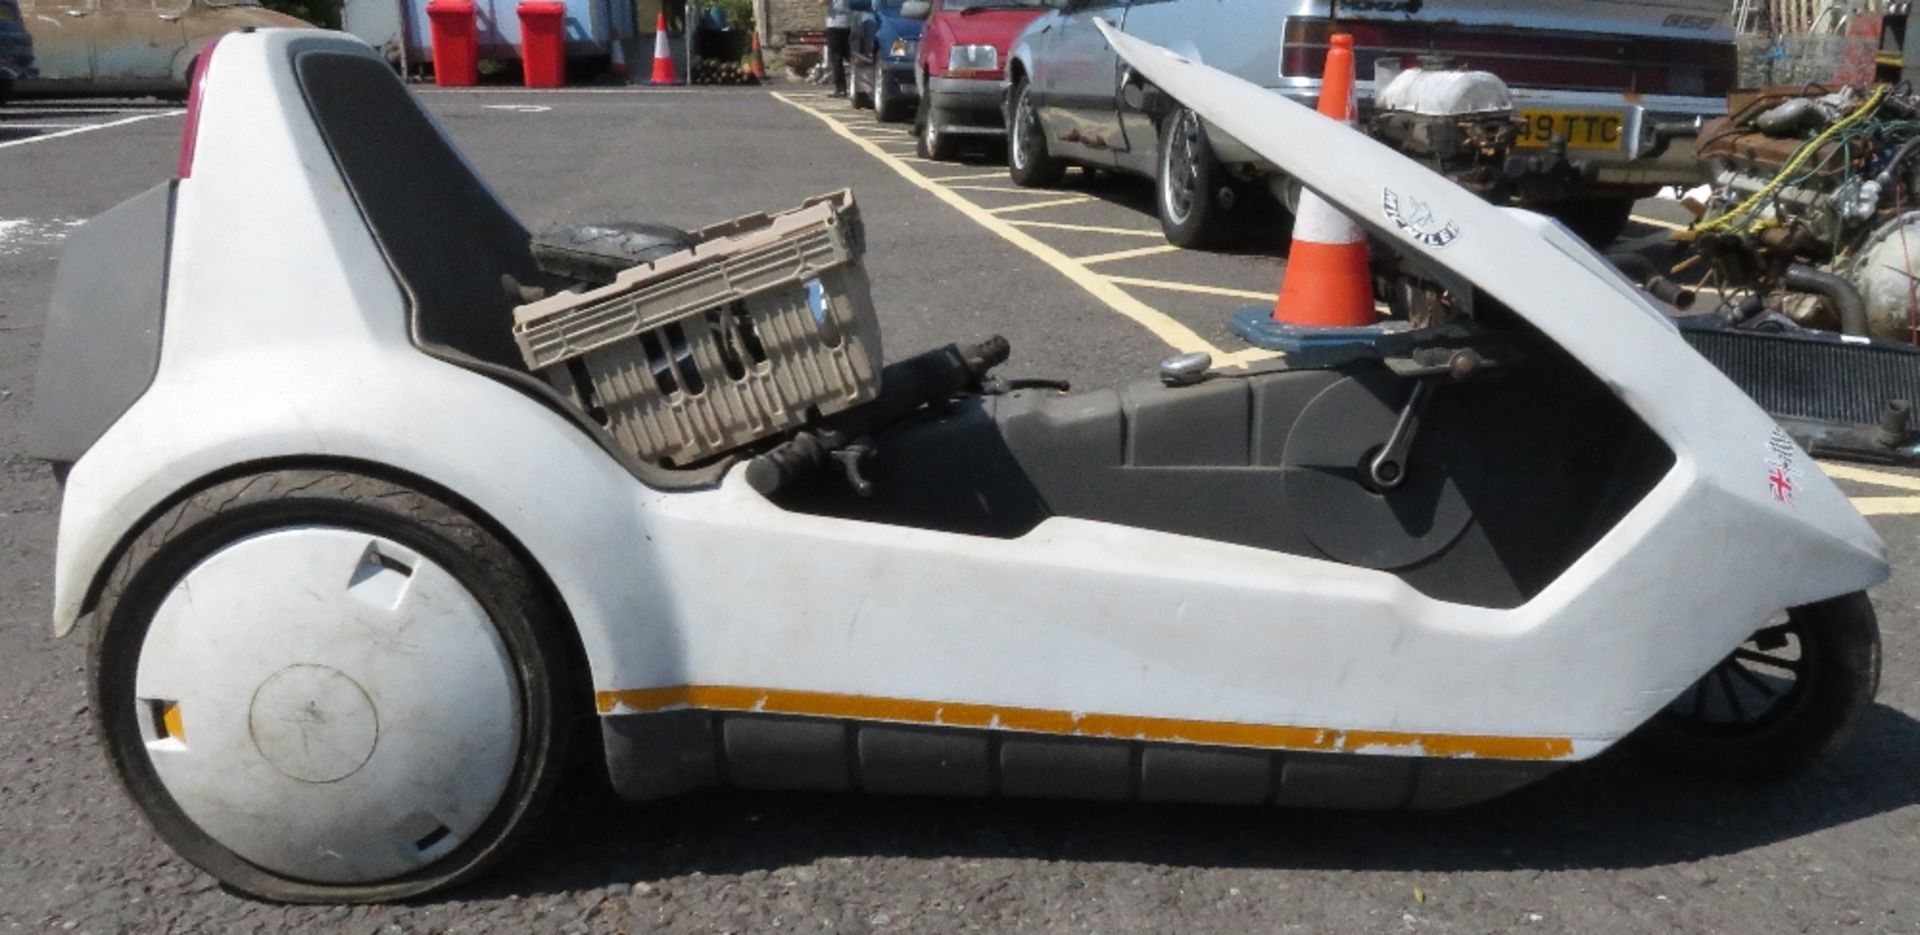 Sinclair C5 with a box of accessories including a spare tyre, wing mirror etc - Image 2 of 6